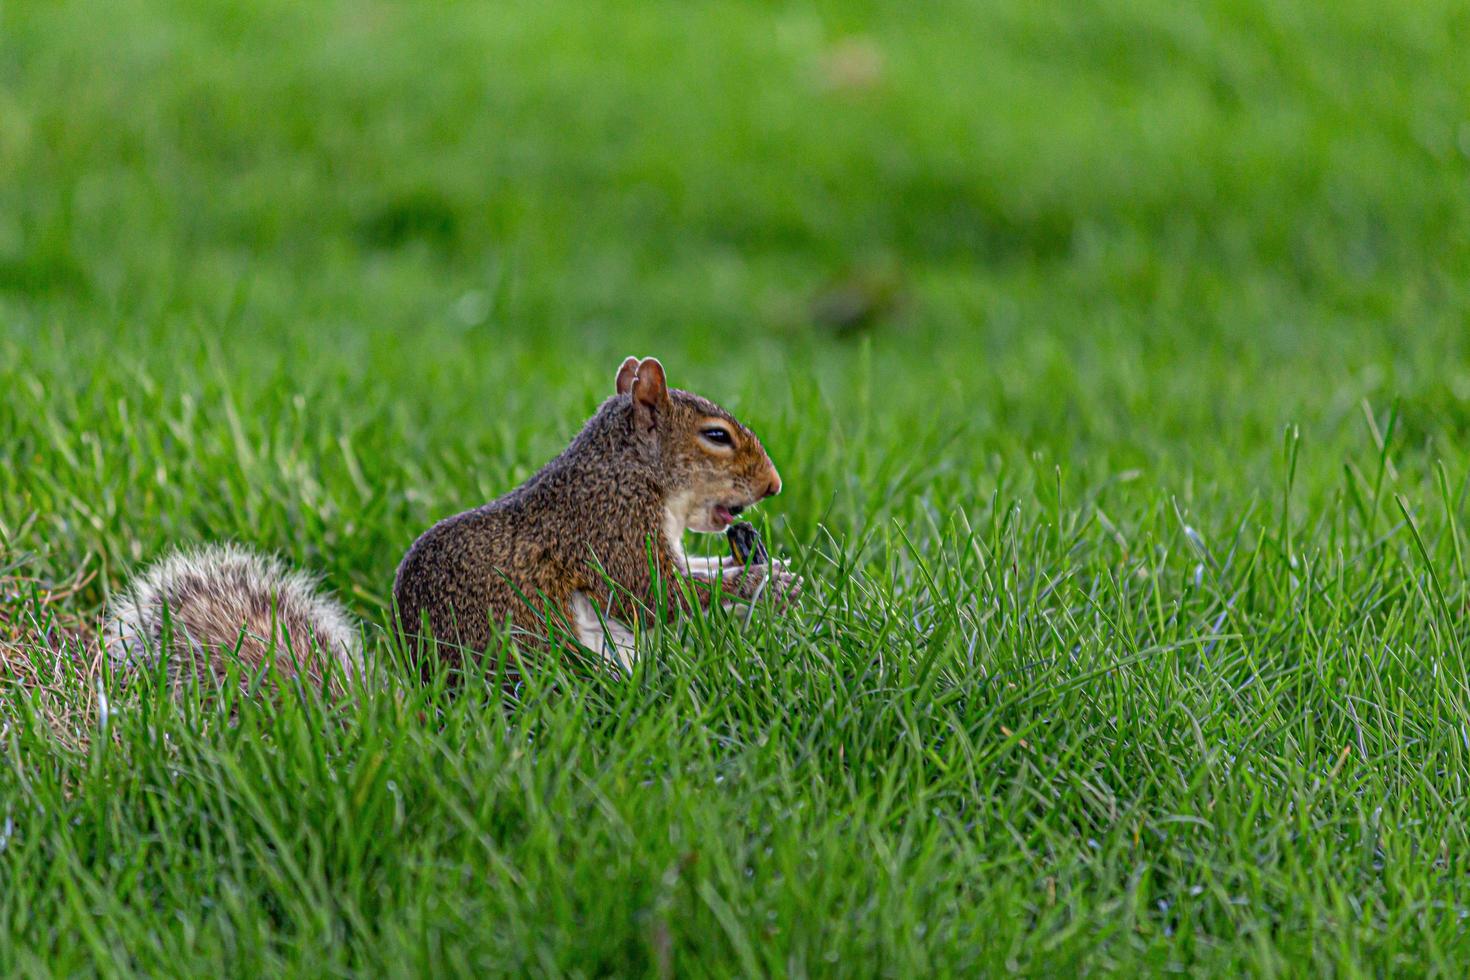 Squirrels playing in park July 2019 photo